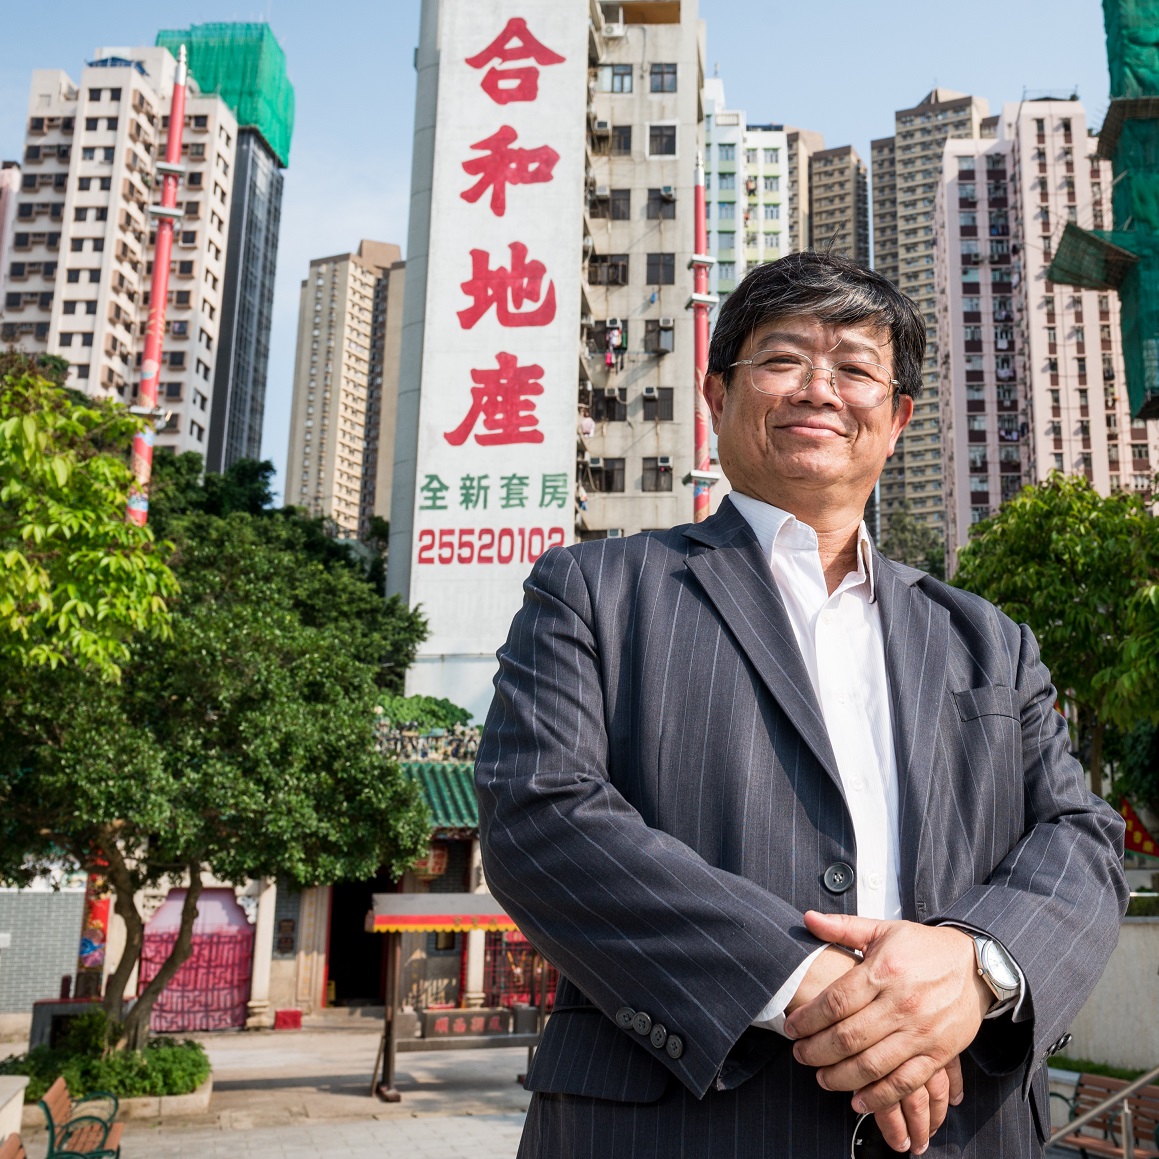 James CHOW Kee Chung: From the Boat to Real Estate